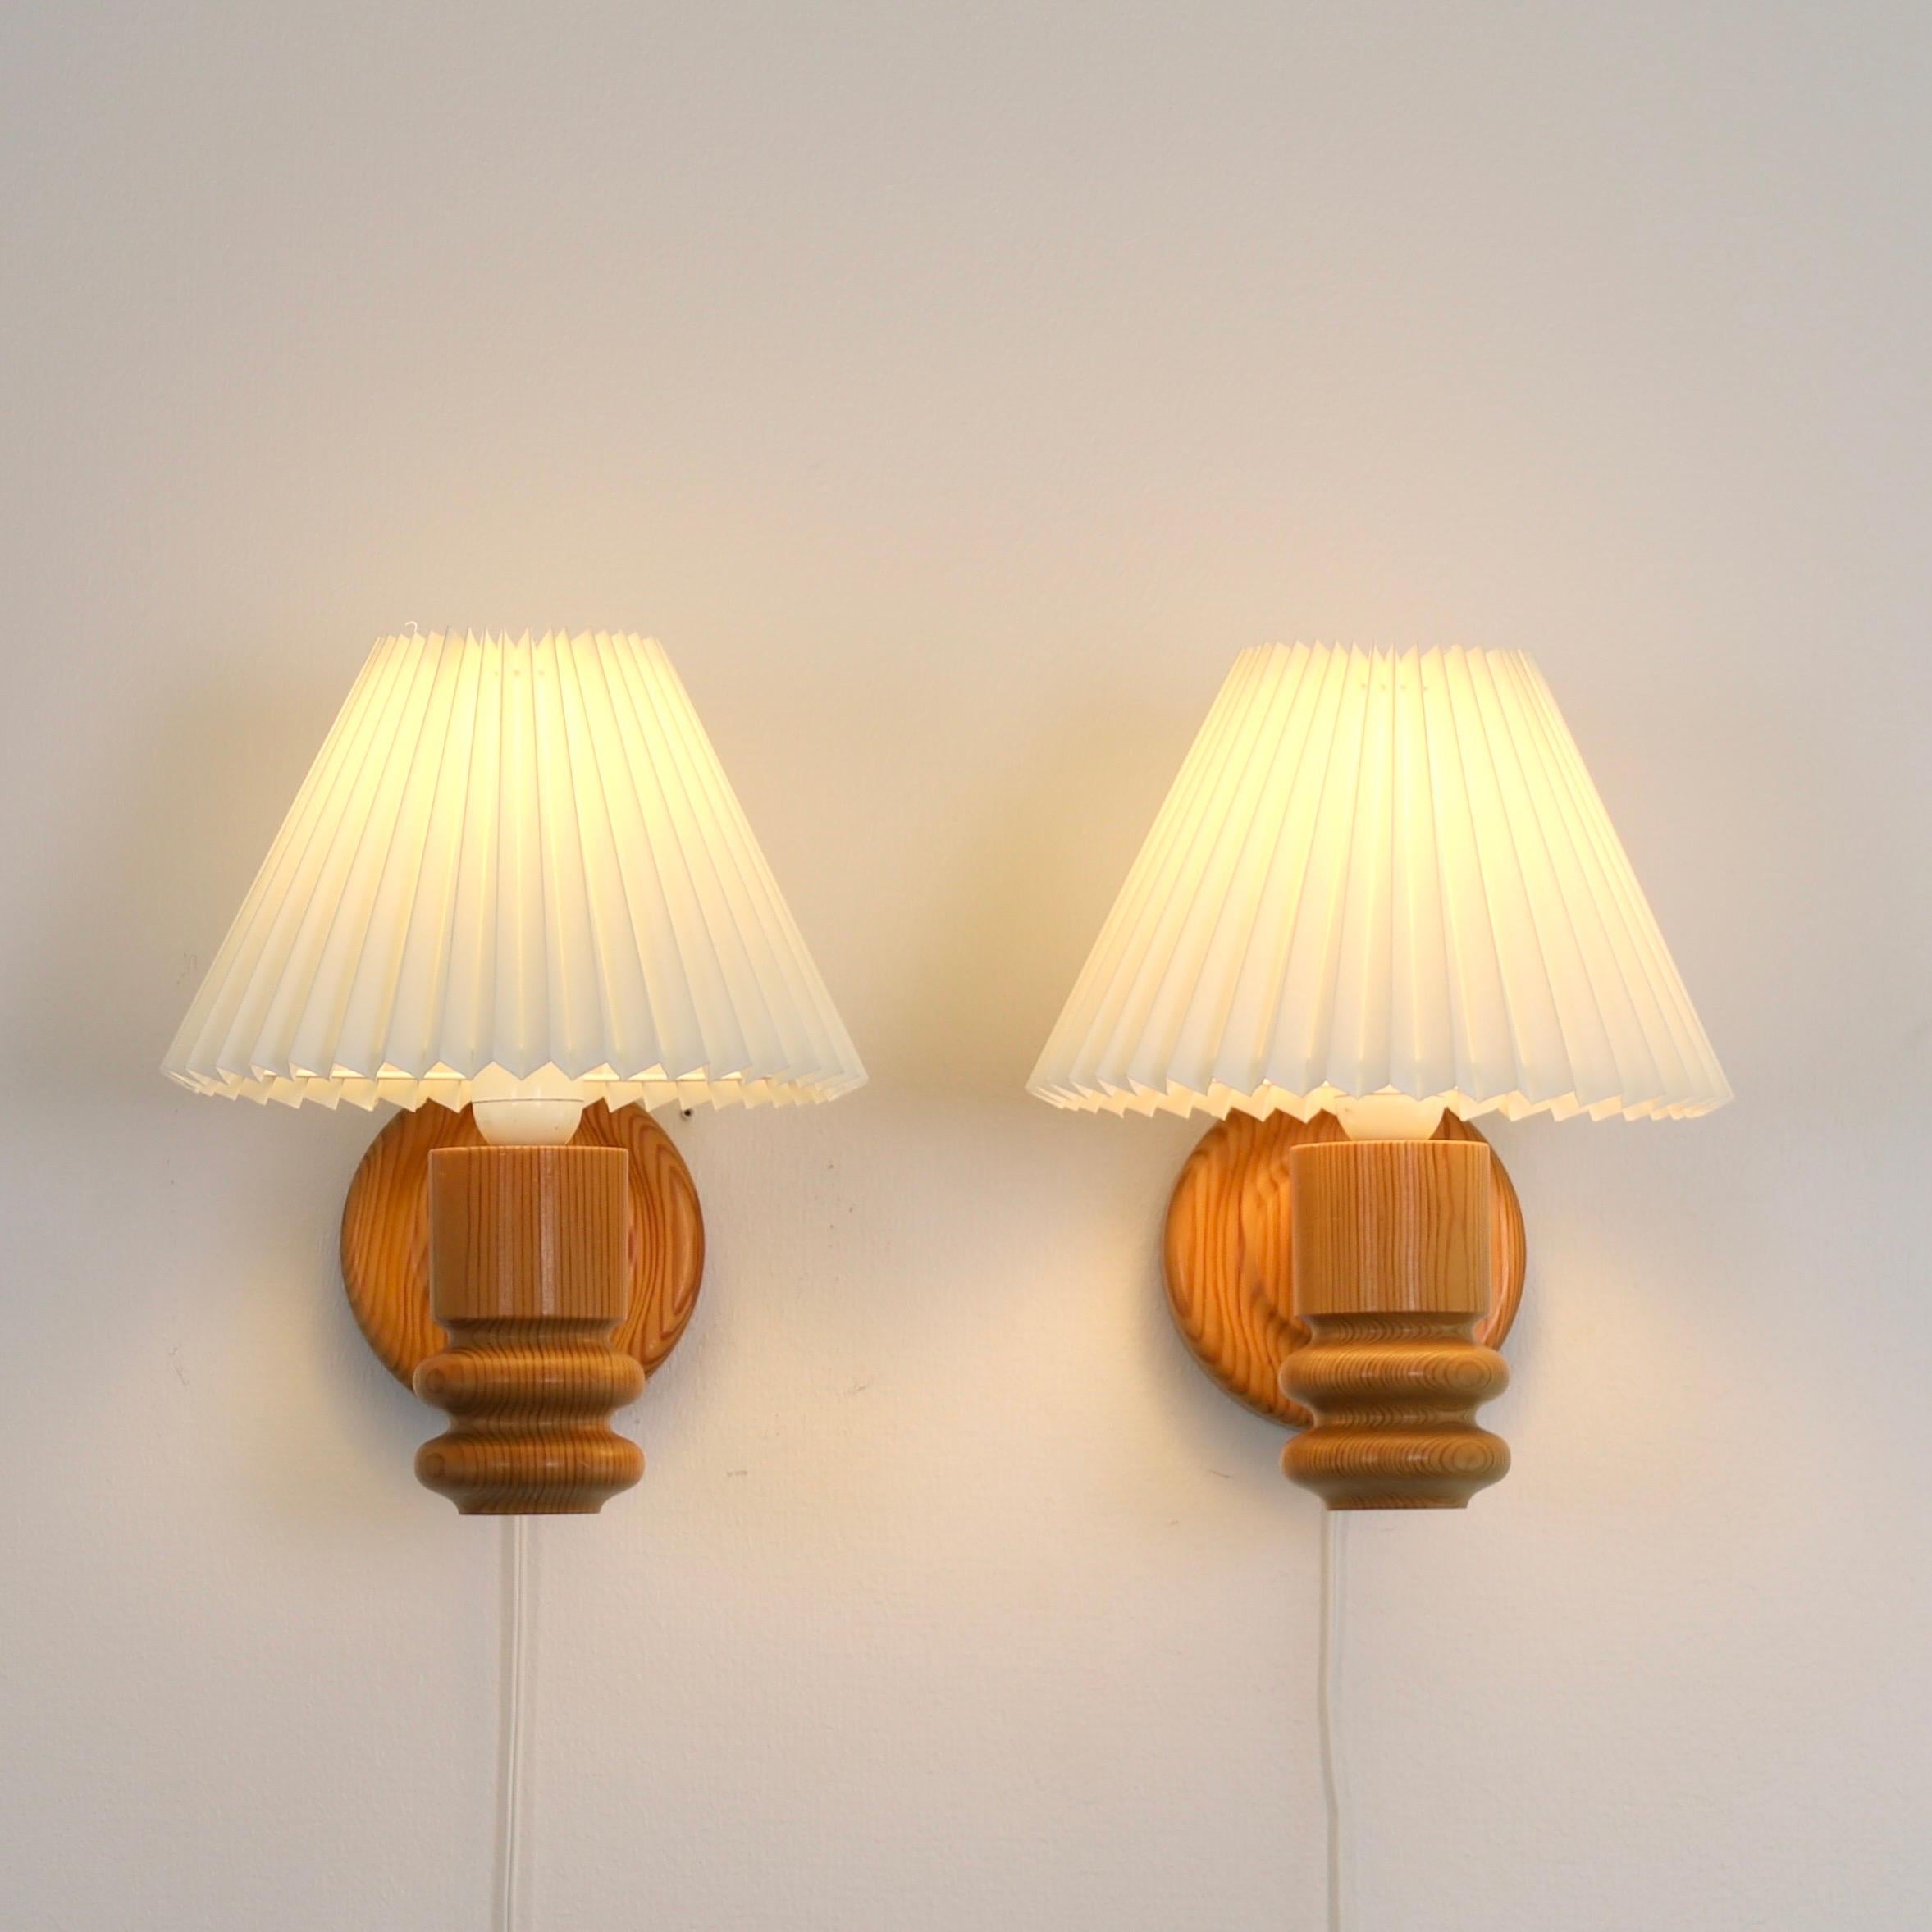 Set of Swedish Pine Wood Wall Lamps by Solbackens Svarveri, Sweden, 1970s For Sale 1